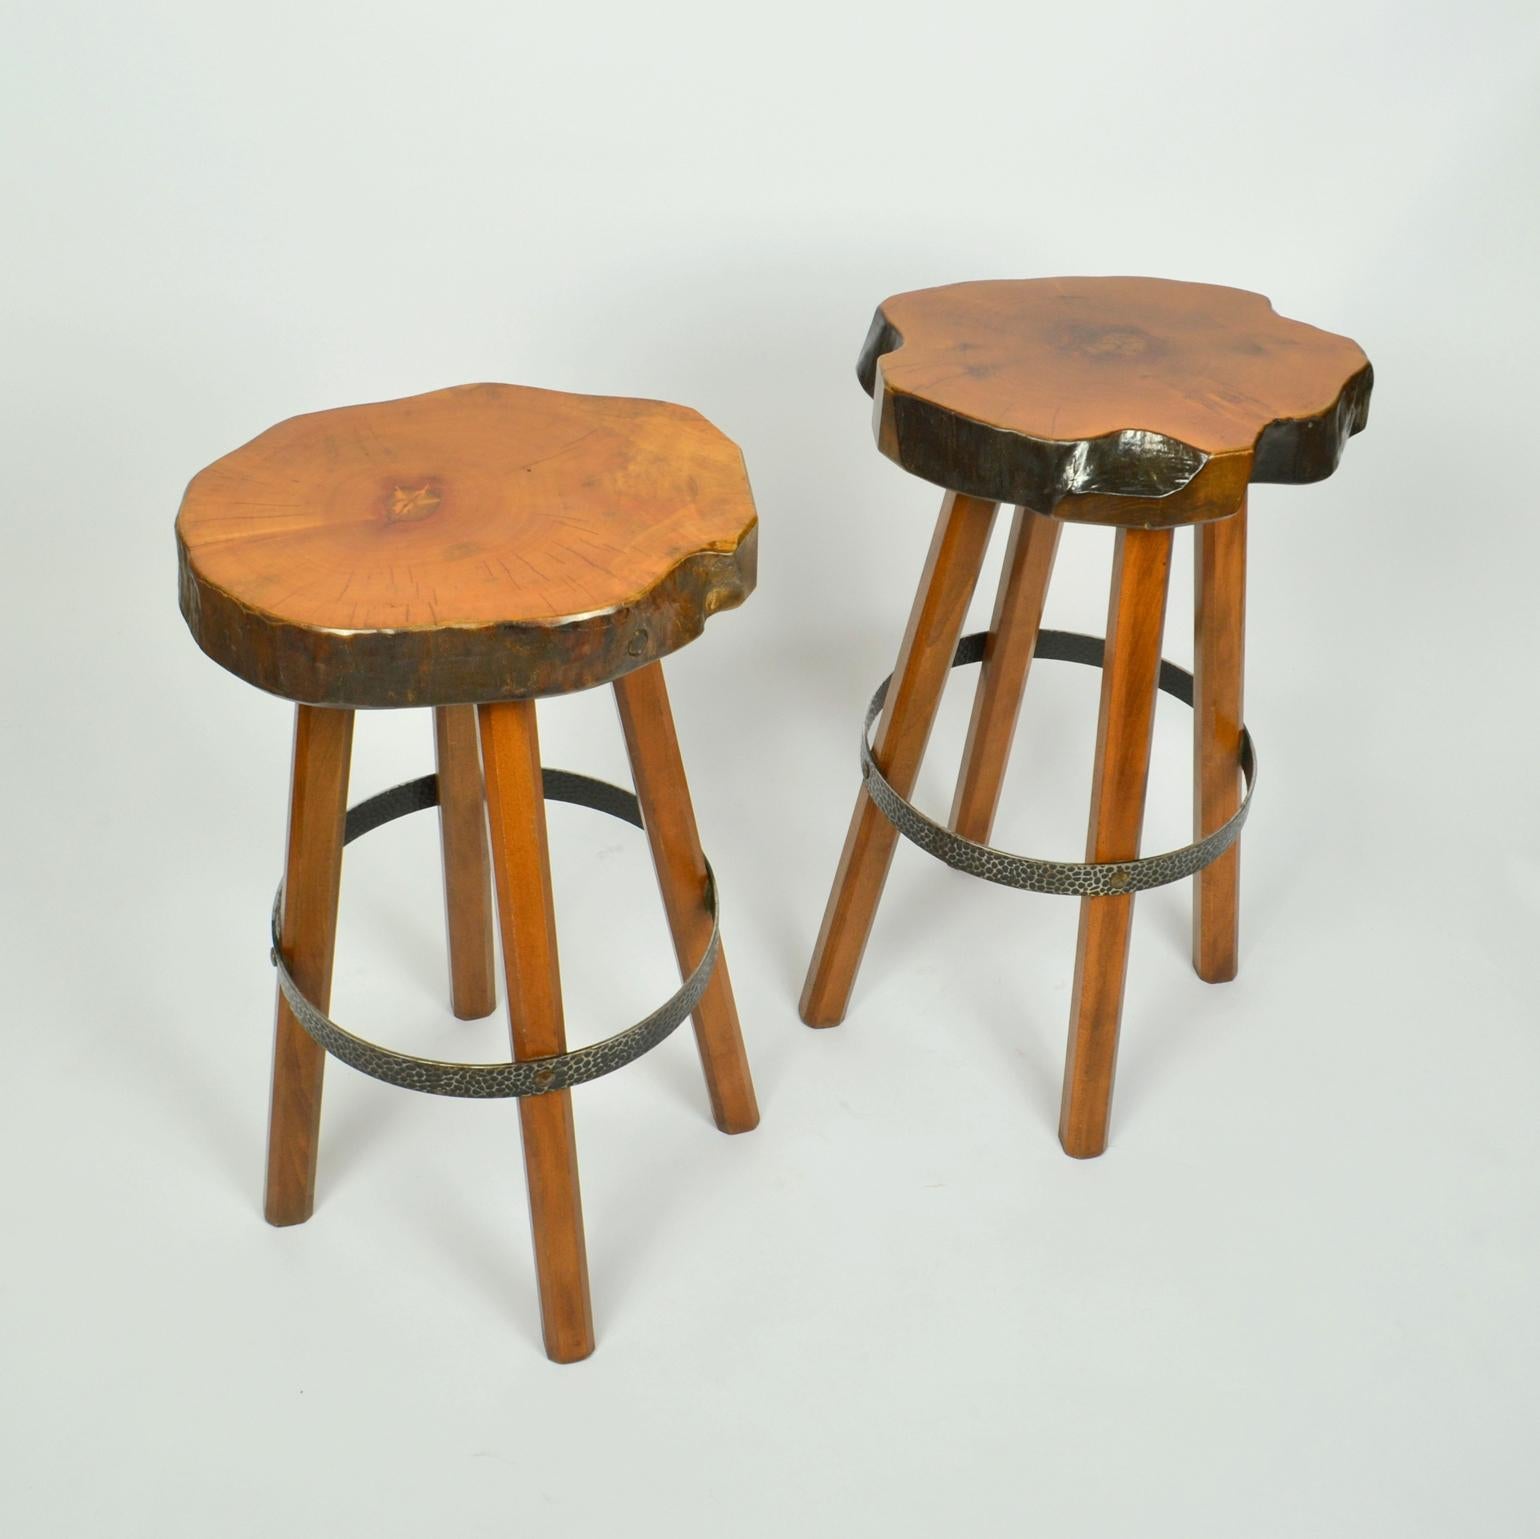 Handcrafted bar stools in Burr Elm wood. These unique stools have been handmade individually, therefore each stool is unique with a freeform shape seat using the natural contours of the wood. The voluptuous four legged high stools have a rustic